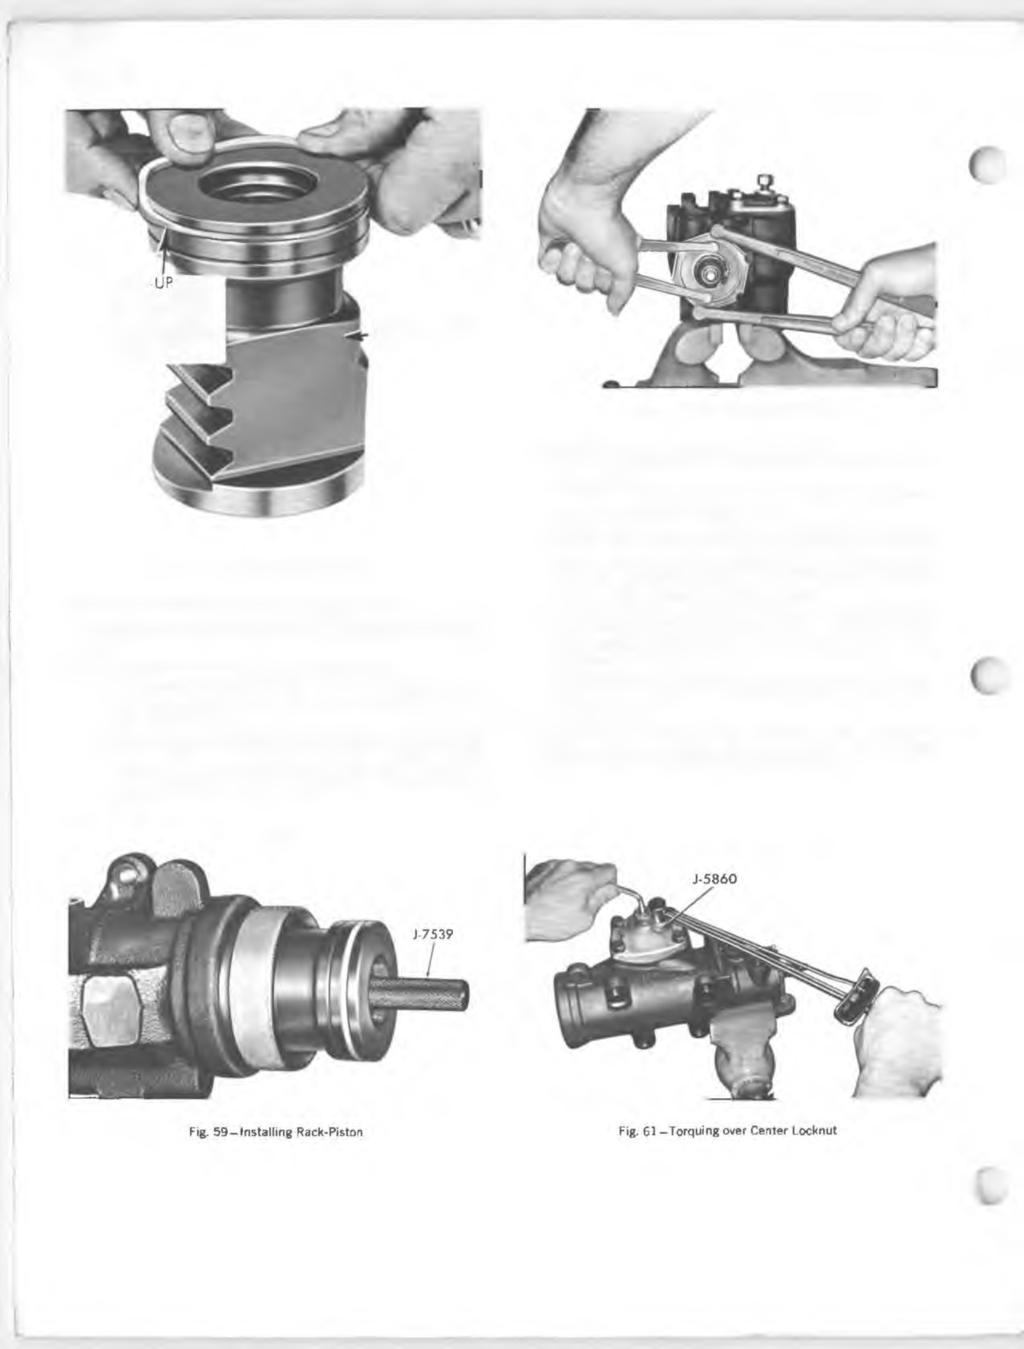 I Page 18 BACK O-RING MUST BE INSTALLED UNDER PISTON RING RACK-PISTON NUT Fig. 60 Locking Preload Adjustment Fig. 58-Installing Ring on Rack-Piston 6. Install the rack-piston plug in the rack-piston.